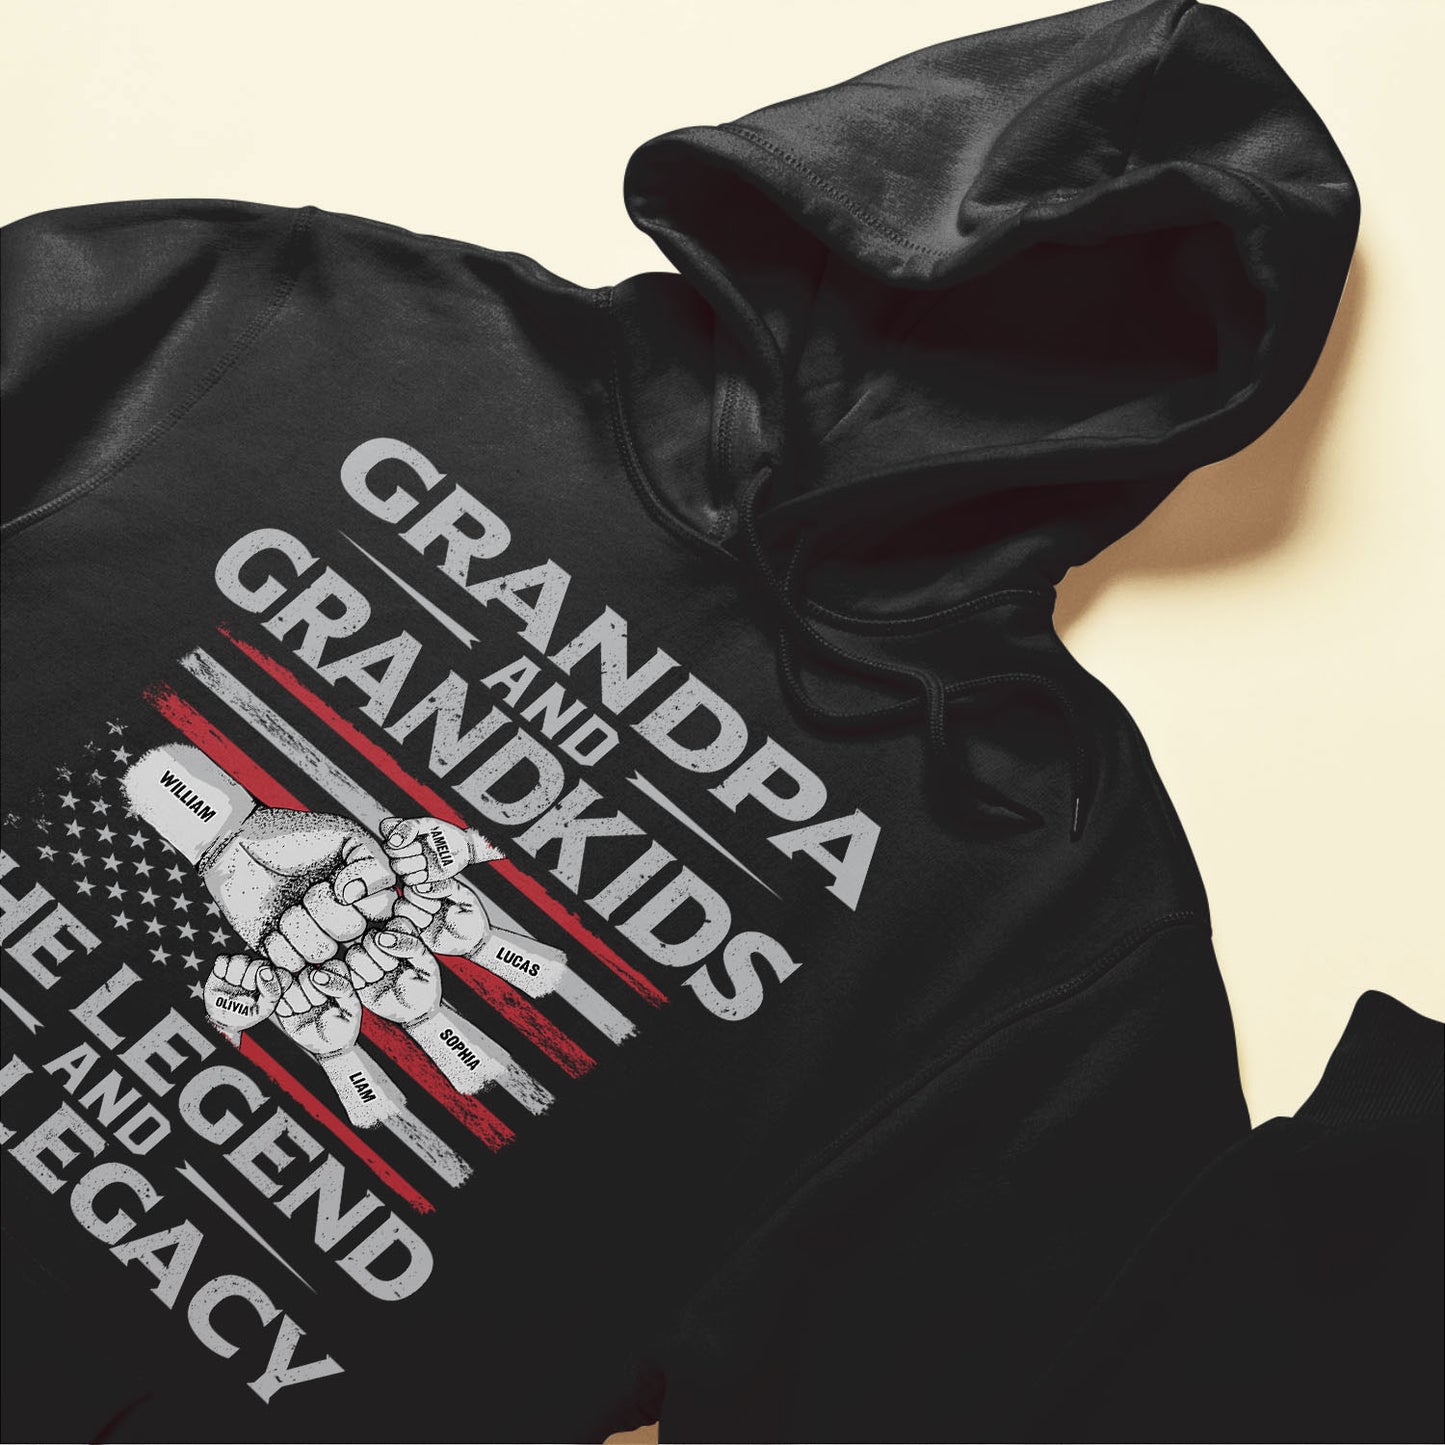 Grandpa & Grandson/Granddaughter, The Legend And The Legacy - Personalized Shirt - Birthday, Grandparents' Day Gift For Grandpa, Pop, Papa, Grandson, Granddaughter